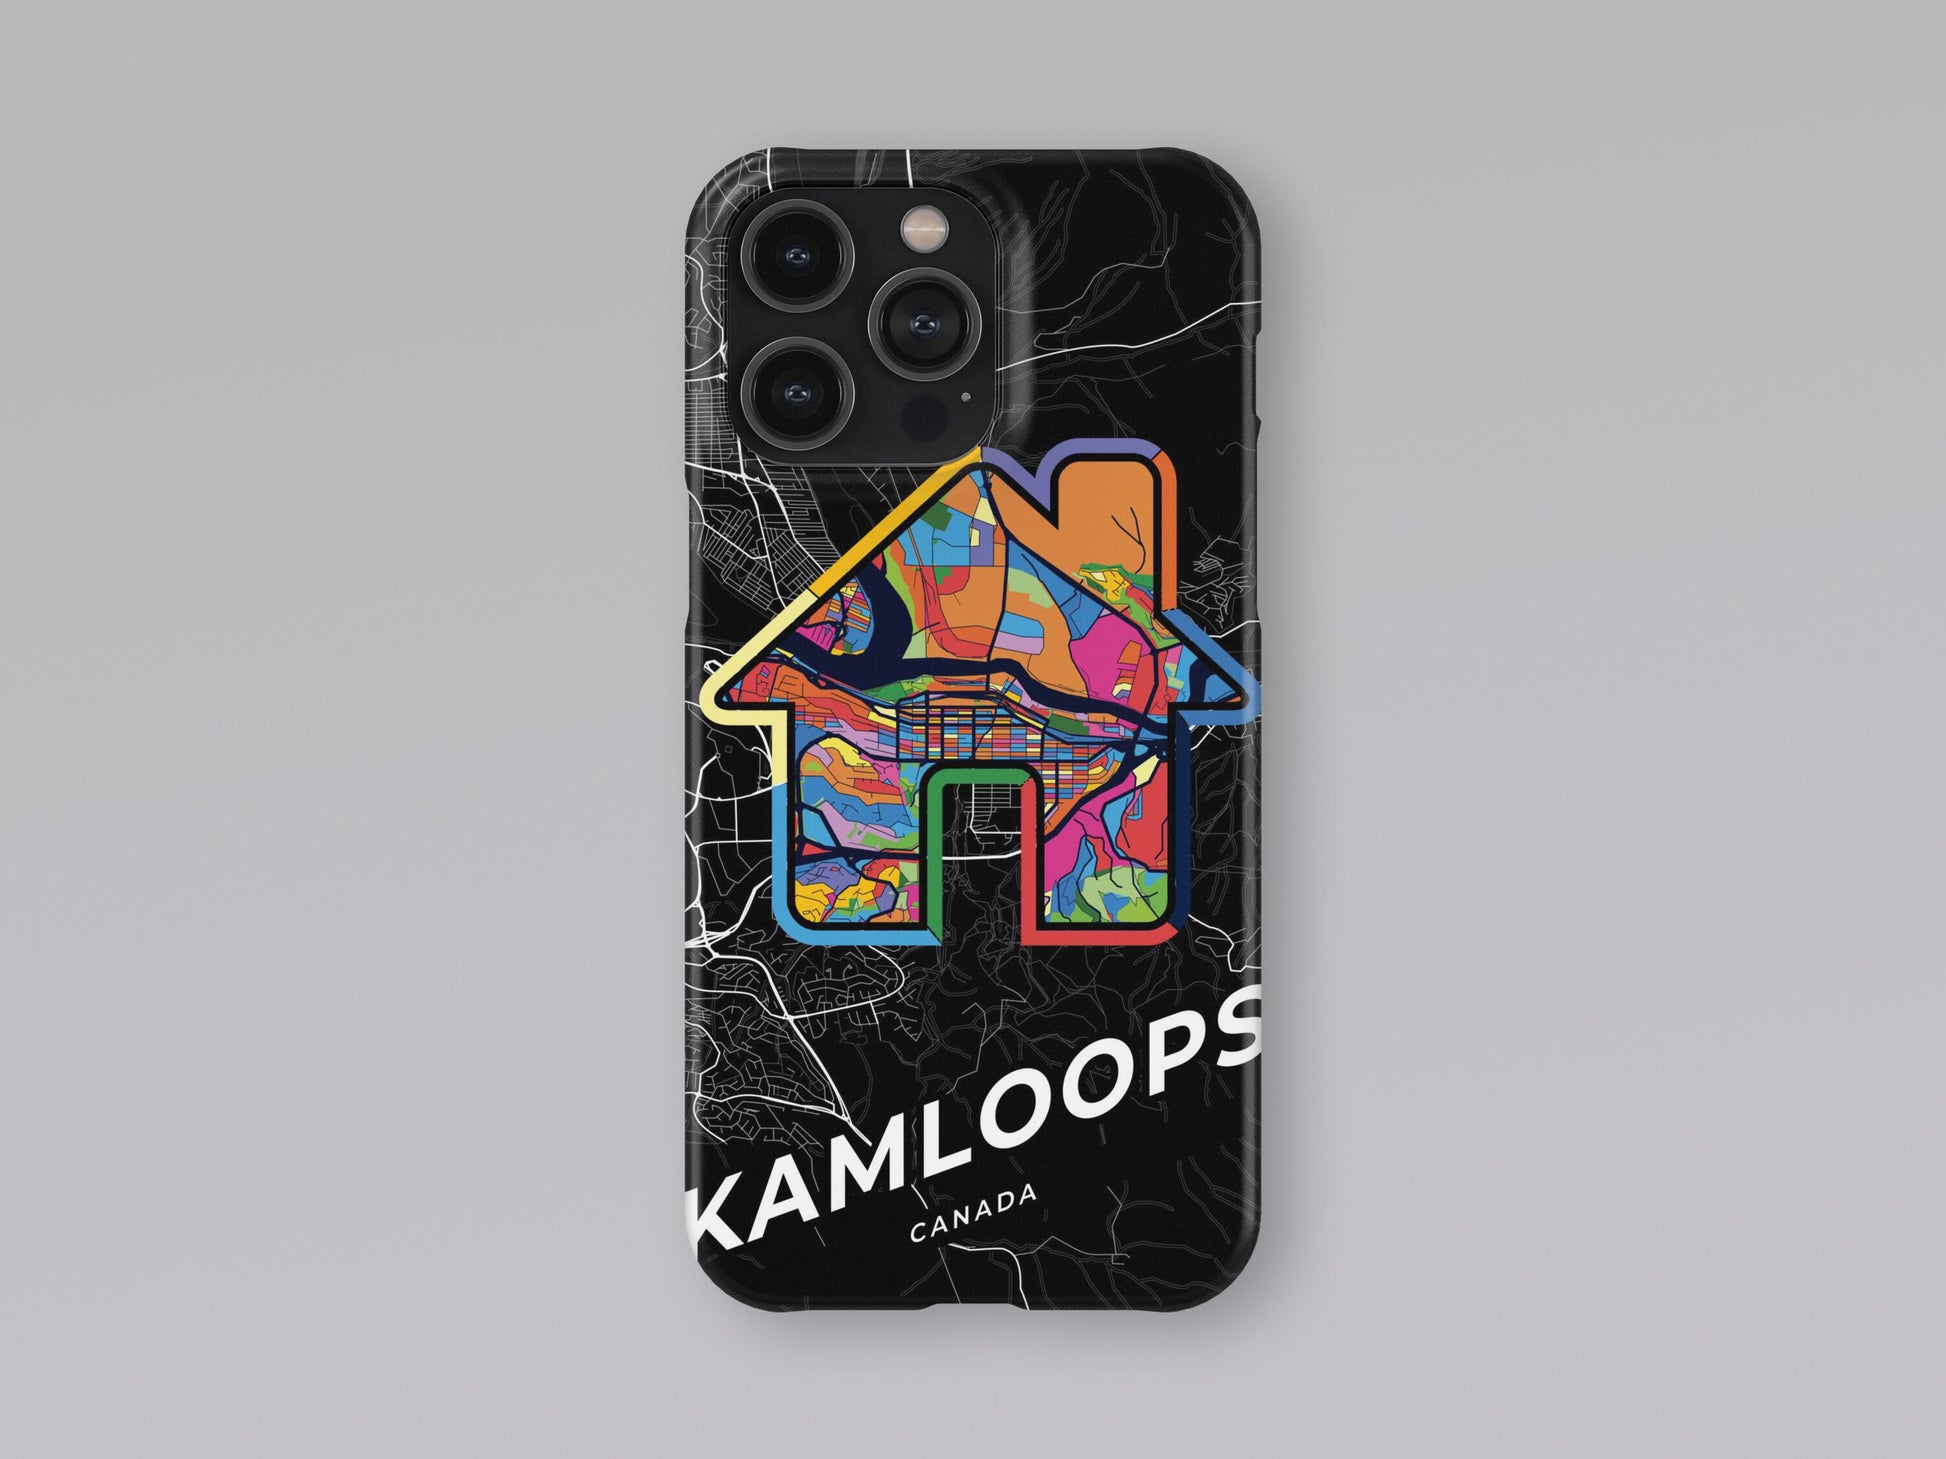 Kamloops Canada slim phone case with colorful icon. Birthday, wedding or housewarming gift. Couple match cases. 3